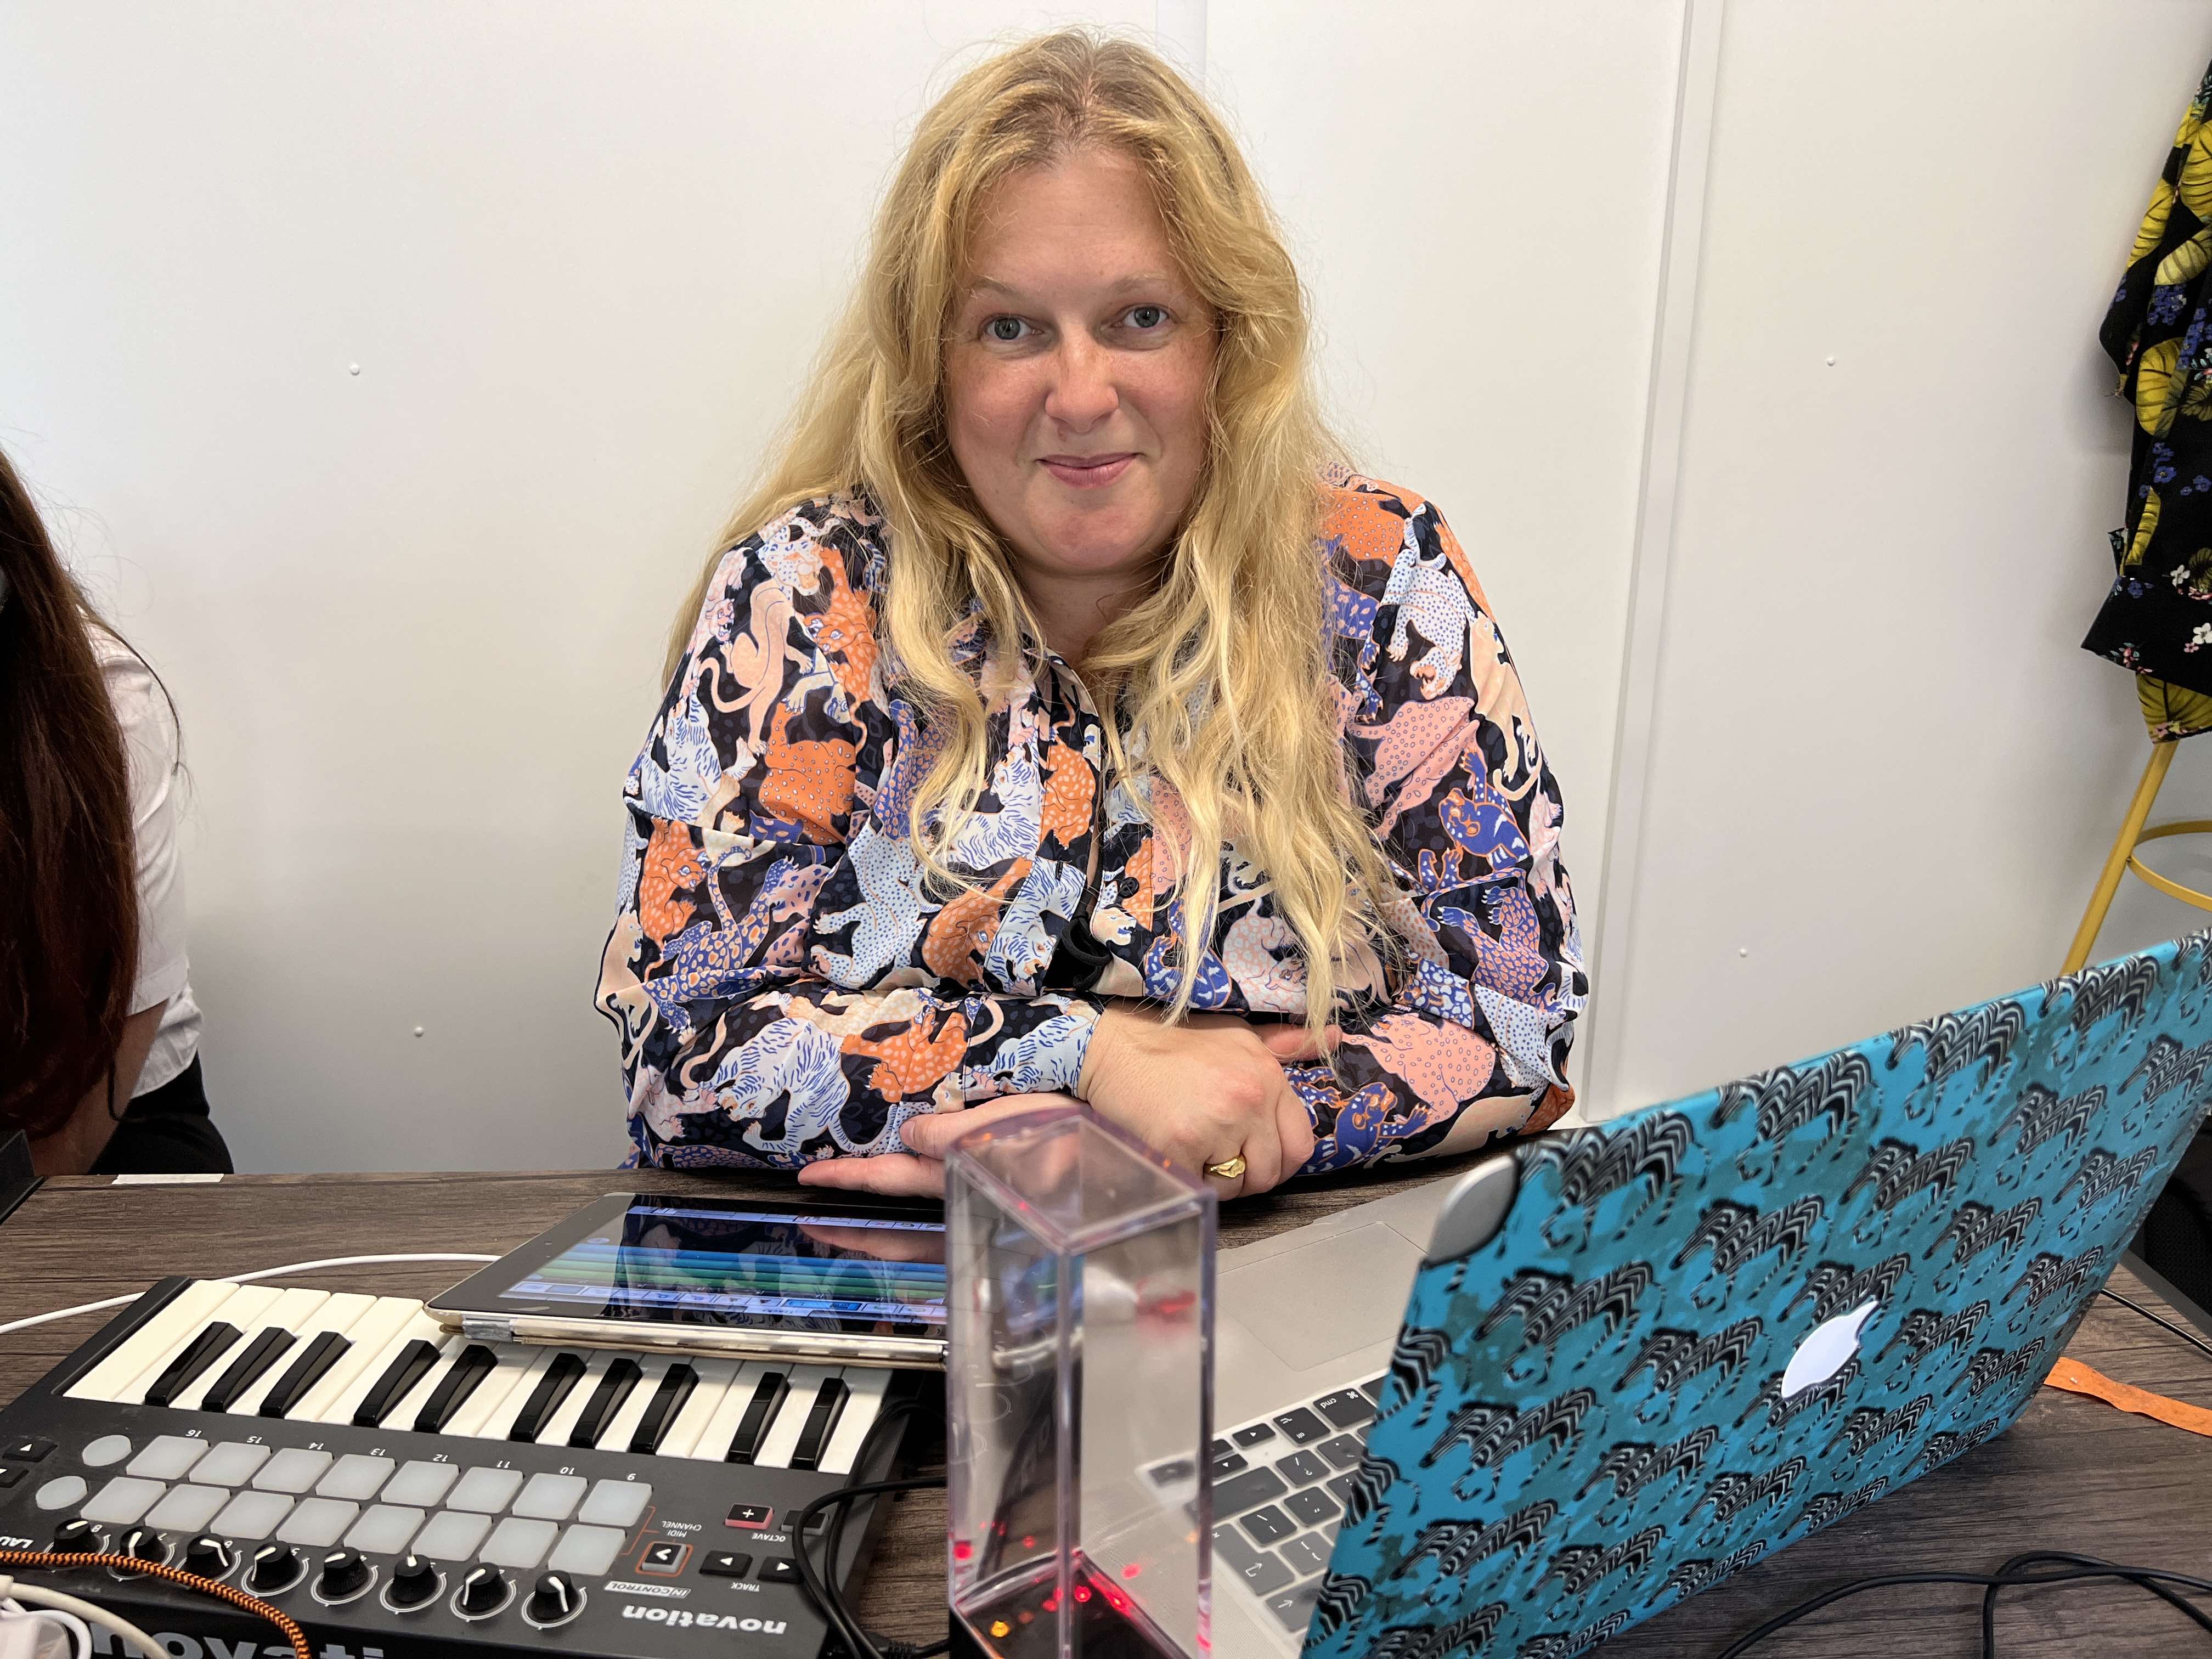 This image shows lead artist Emily Peasgood sat at a table in the comunity hub at Victoria Park in Ashford. She is smiling at the camera and a small MIDI keyboard, IPAD and laptop are positioned in front of her. 